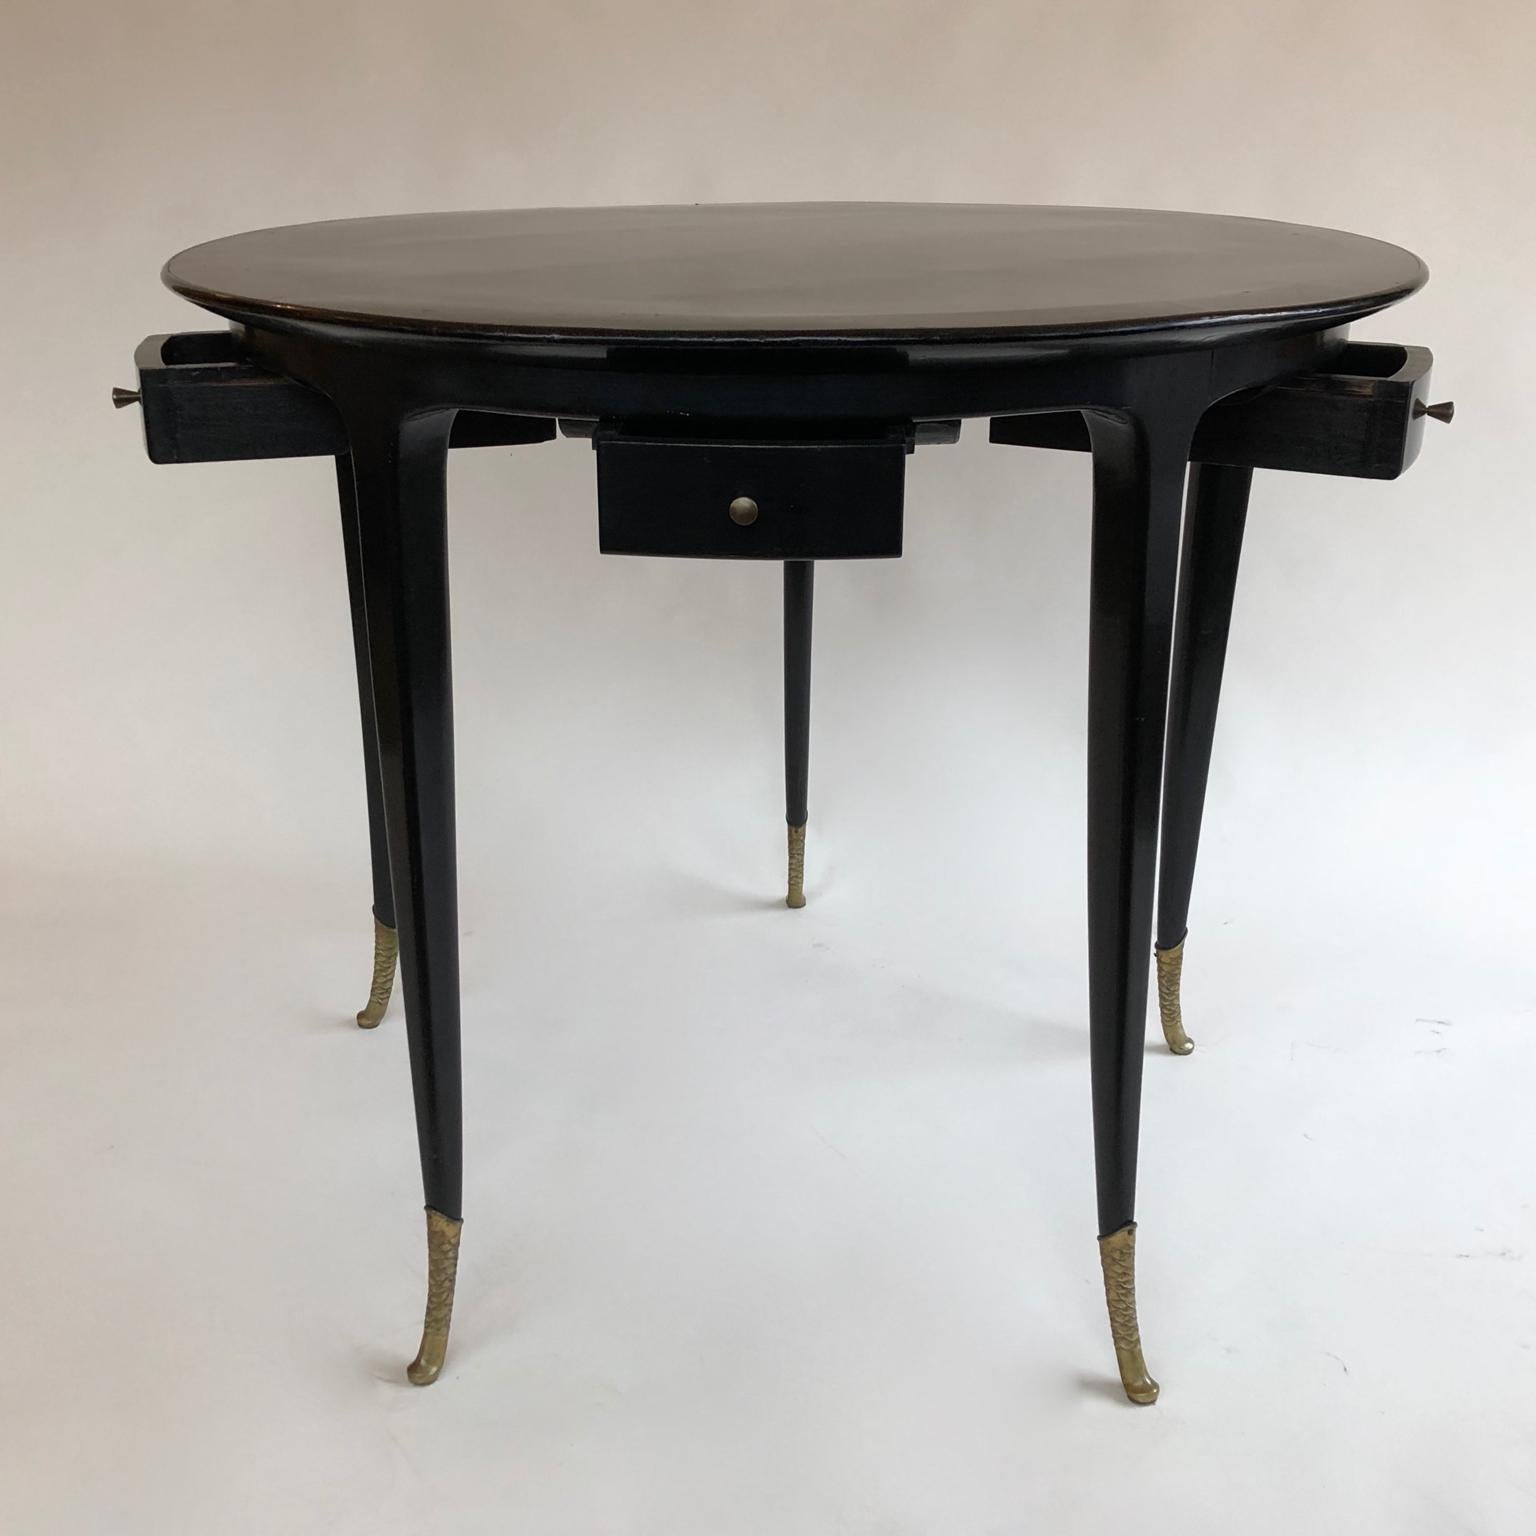 Ebonized 1940s Circular Black Ebonised Italian Games Table with Drawers and Brass Sabots